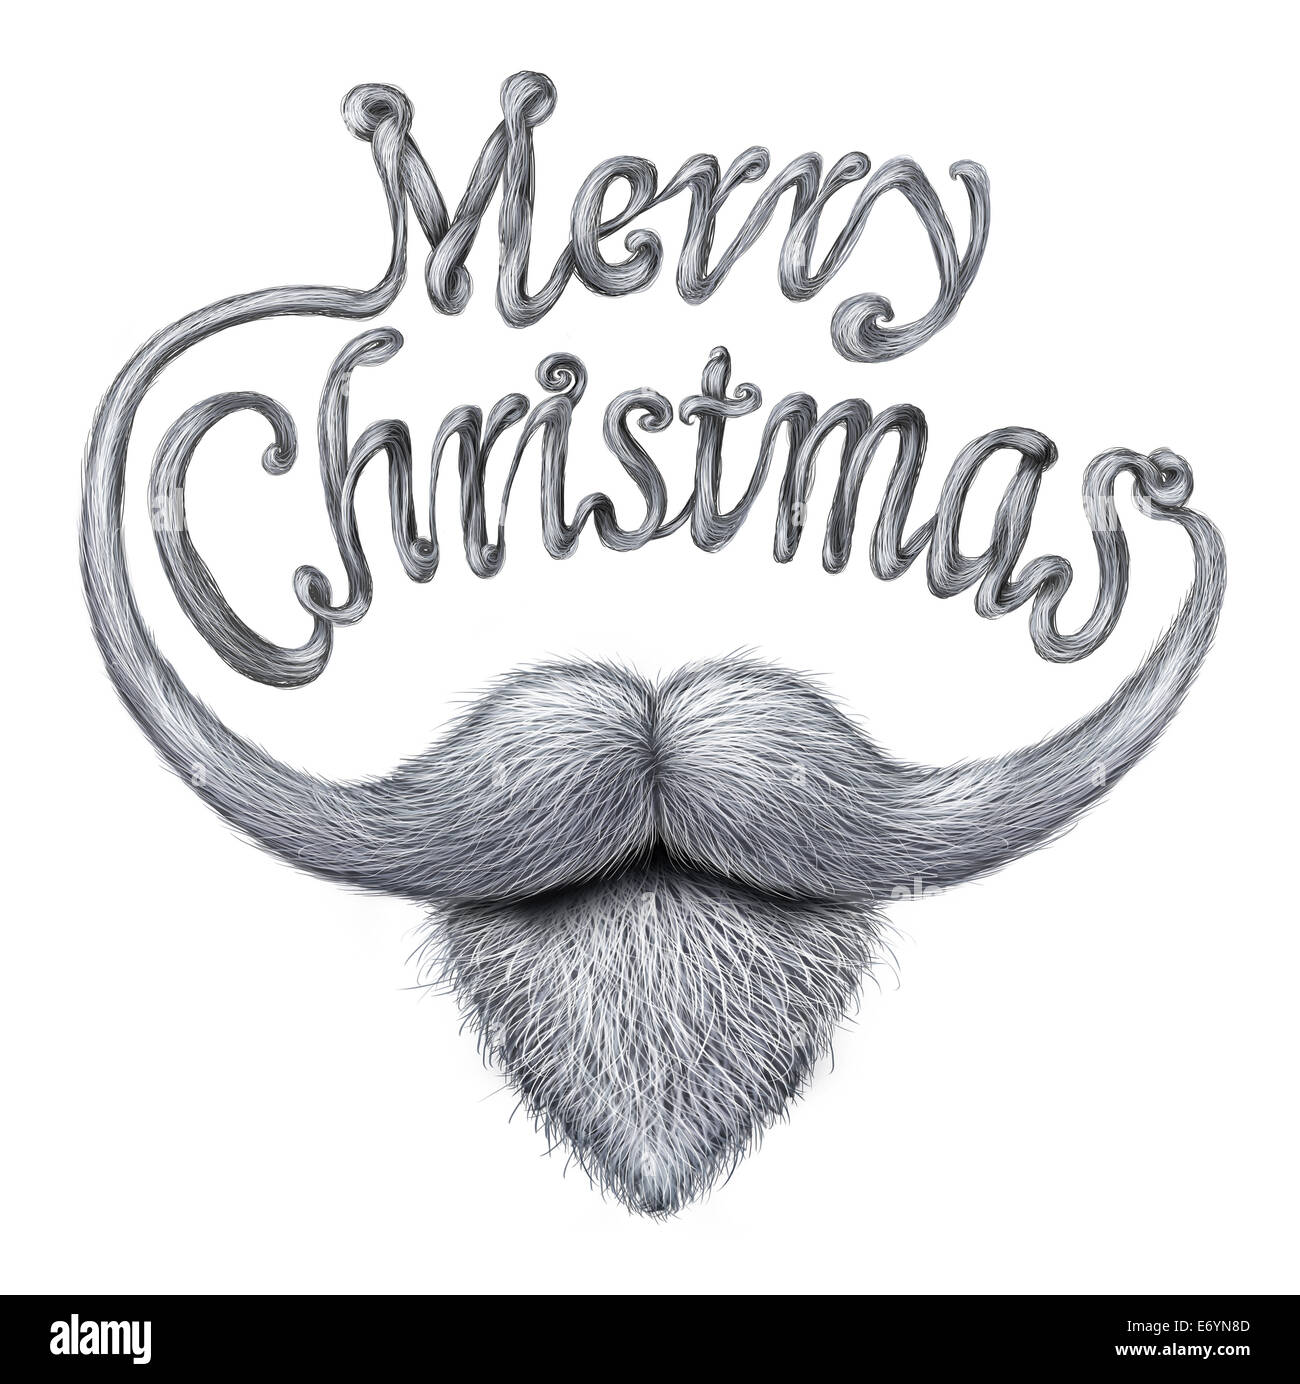 Merry Christmas concept as a happy humorous greeting card message as a santa clause beard and mustache with long whiskers shaped as written text on a white background. Stock Photo